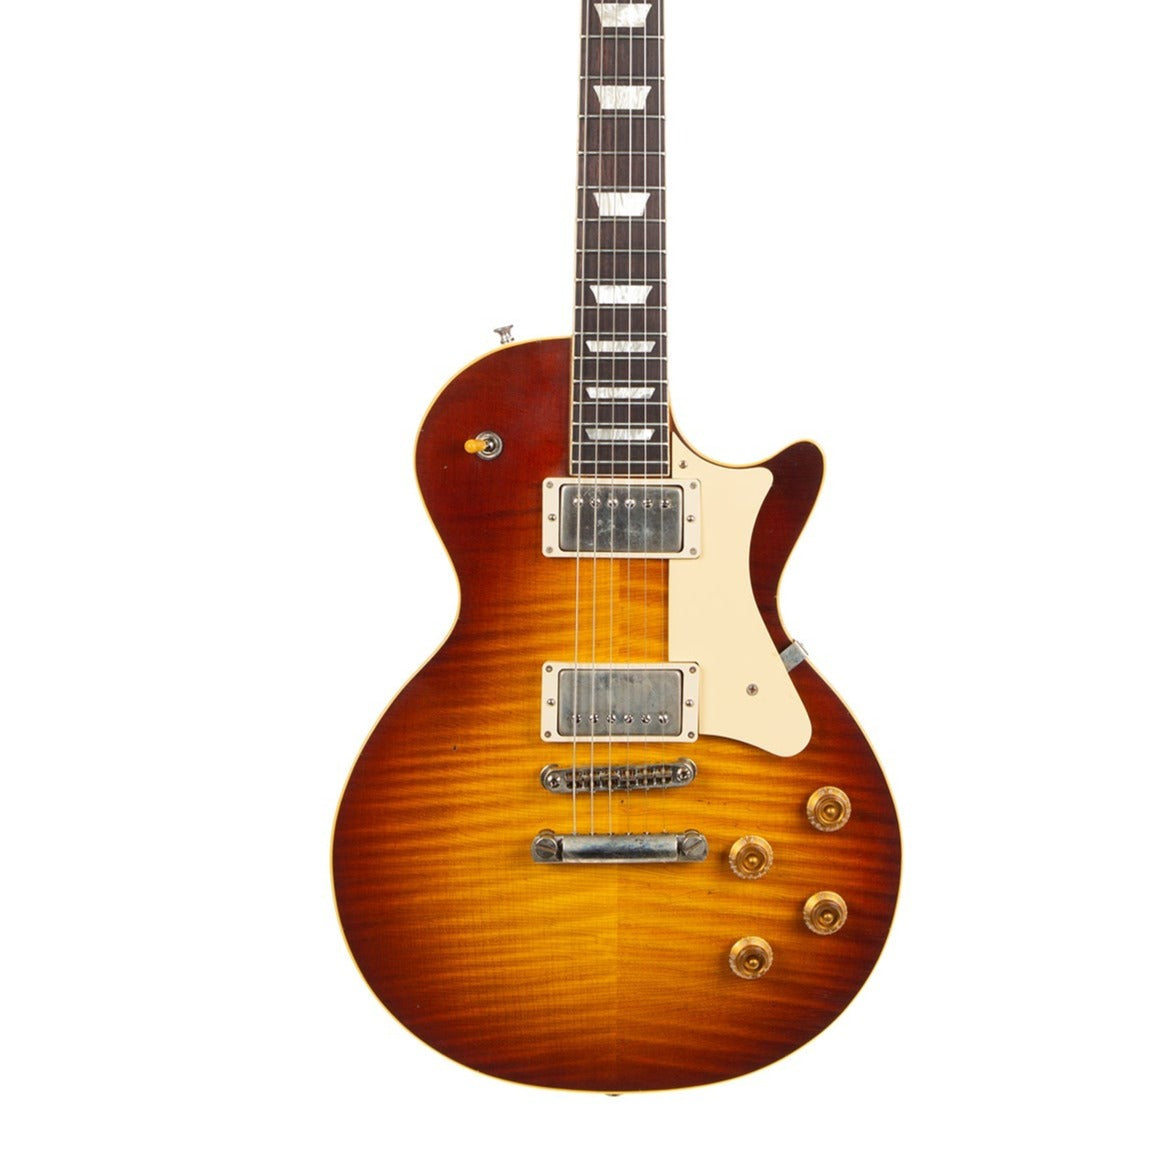 Heritage Custom Shop Core Collection H-150 Electric Guitar with Case, Tobacco Sunburst, Artisan Aged